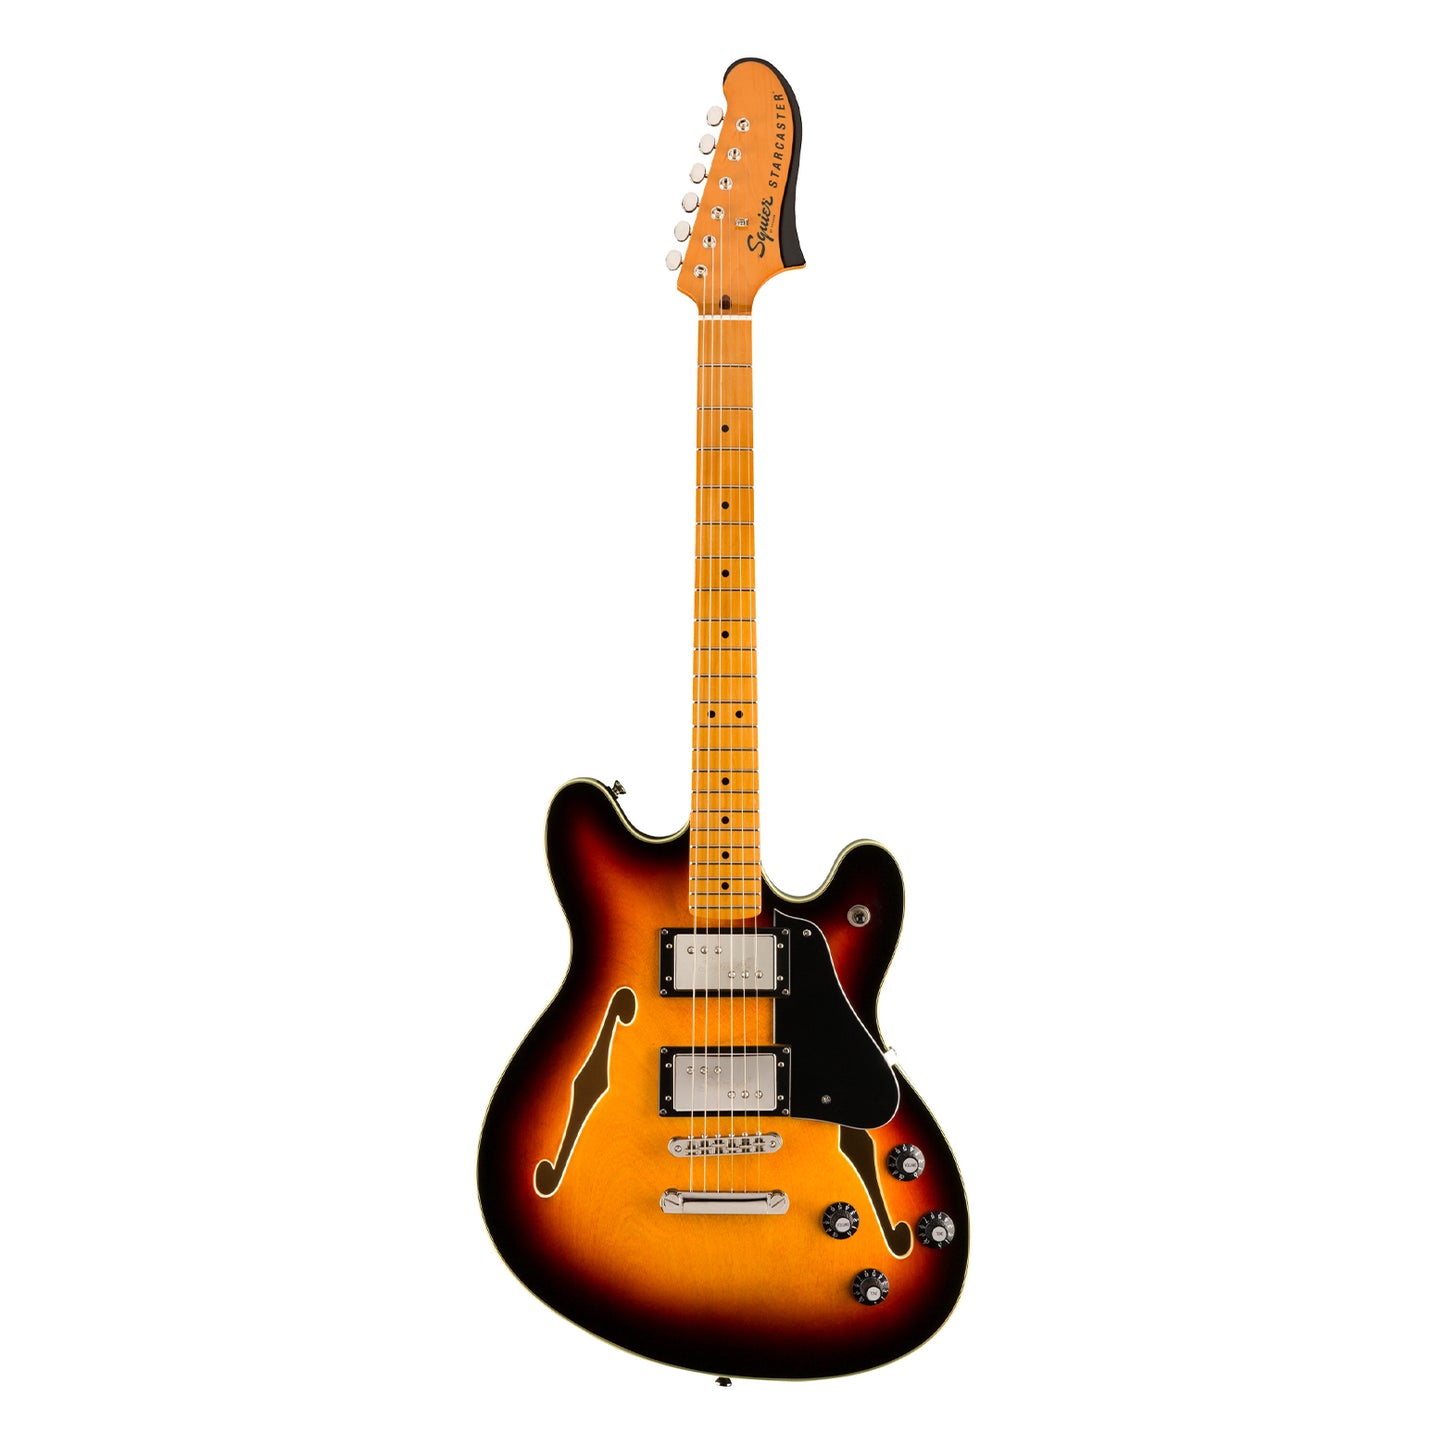 Squier by Fender Classic Vibe Starcaster Electric Guitar with HH Pickup, Semi Hollow Body, Maple Fingerboard, Adjustable Bridge (3-Color Sunburst, Natural, Walnut)